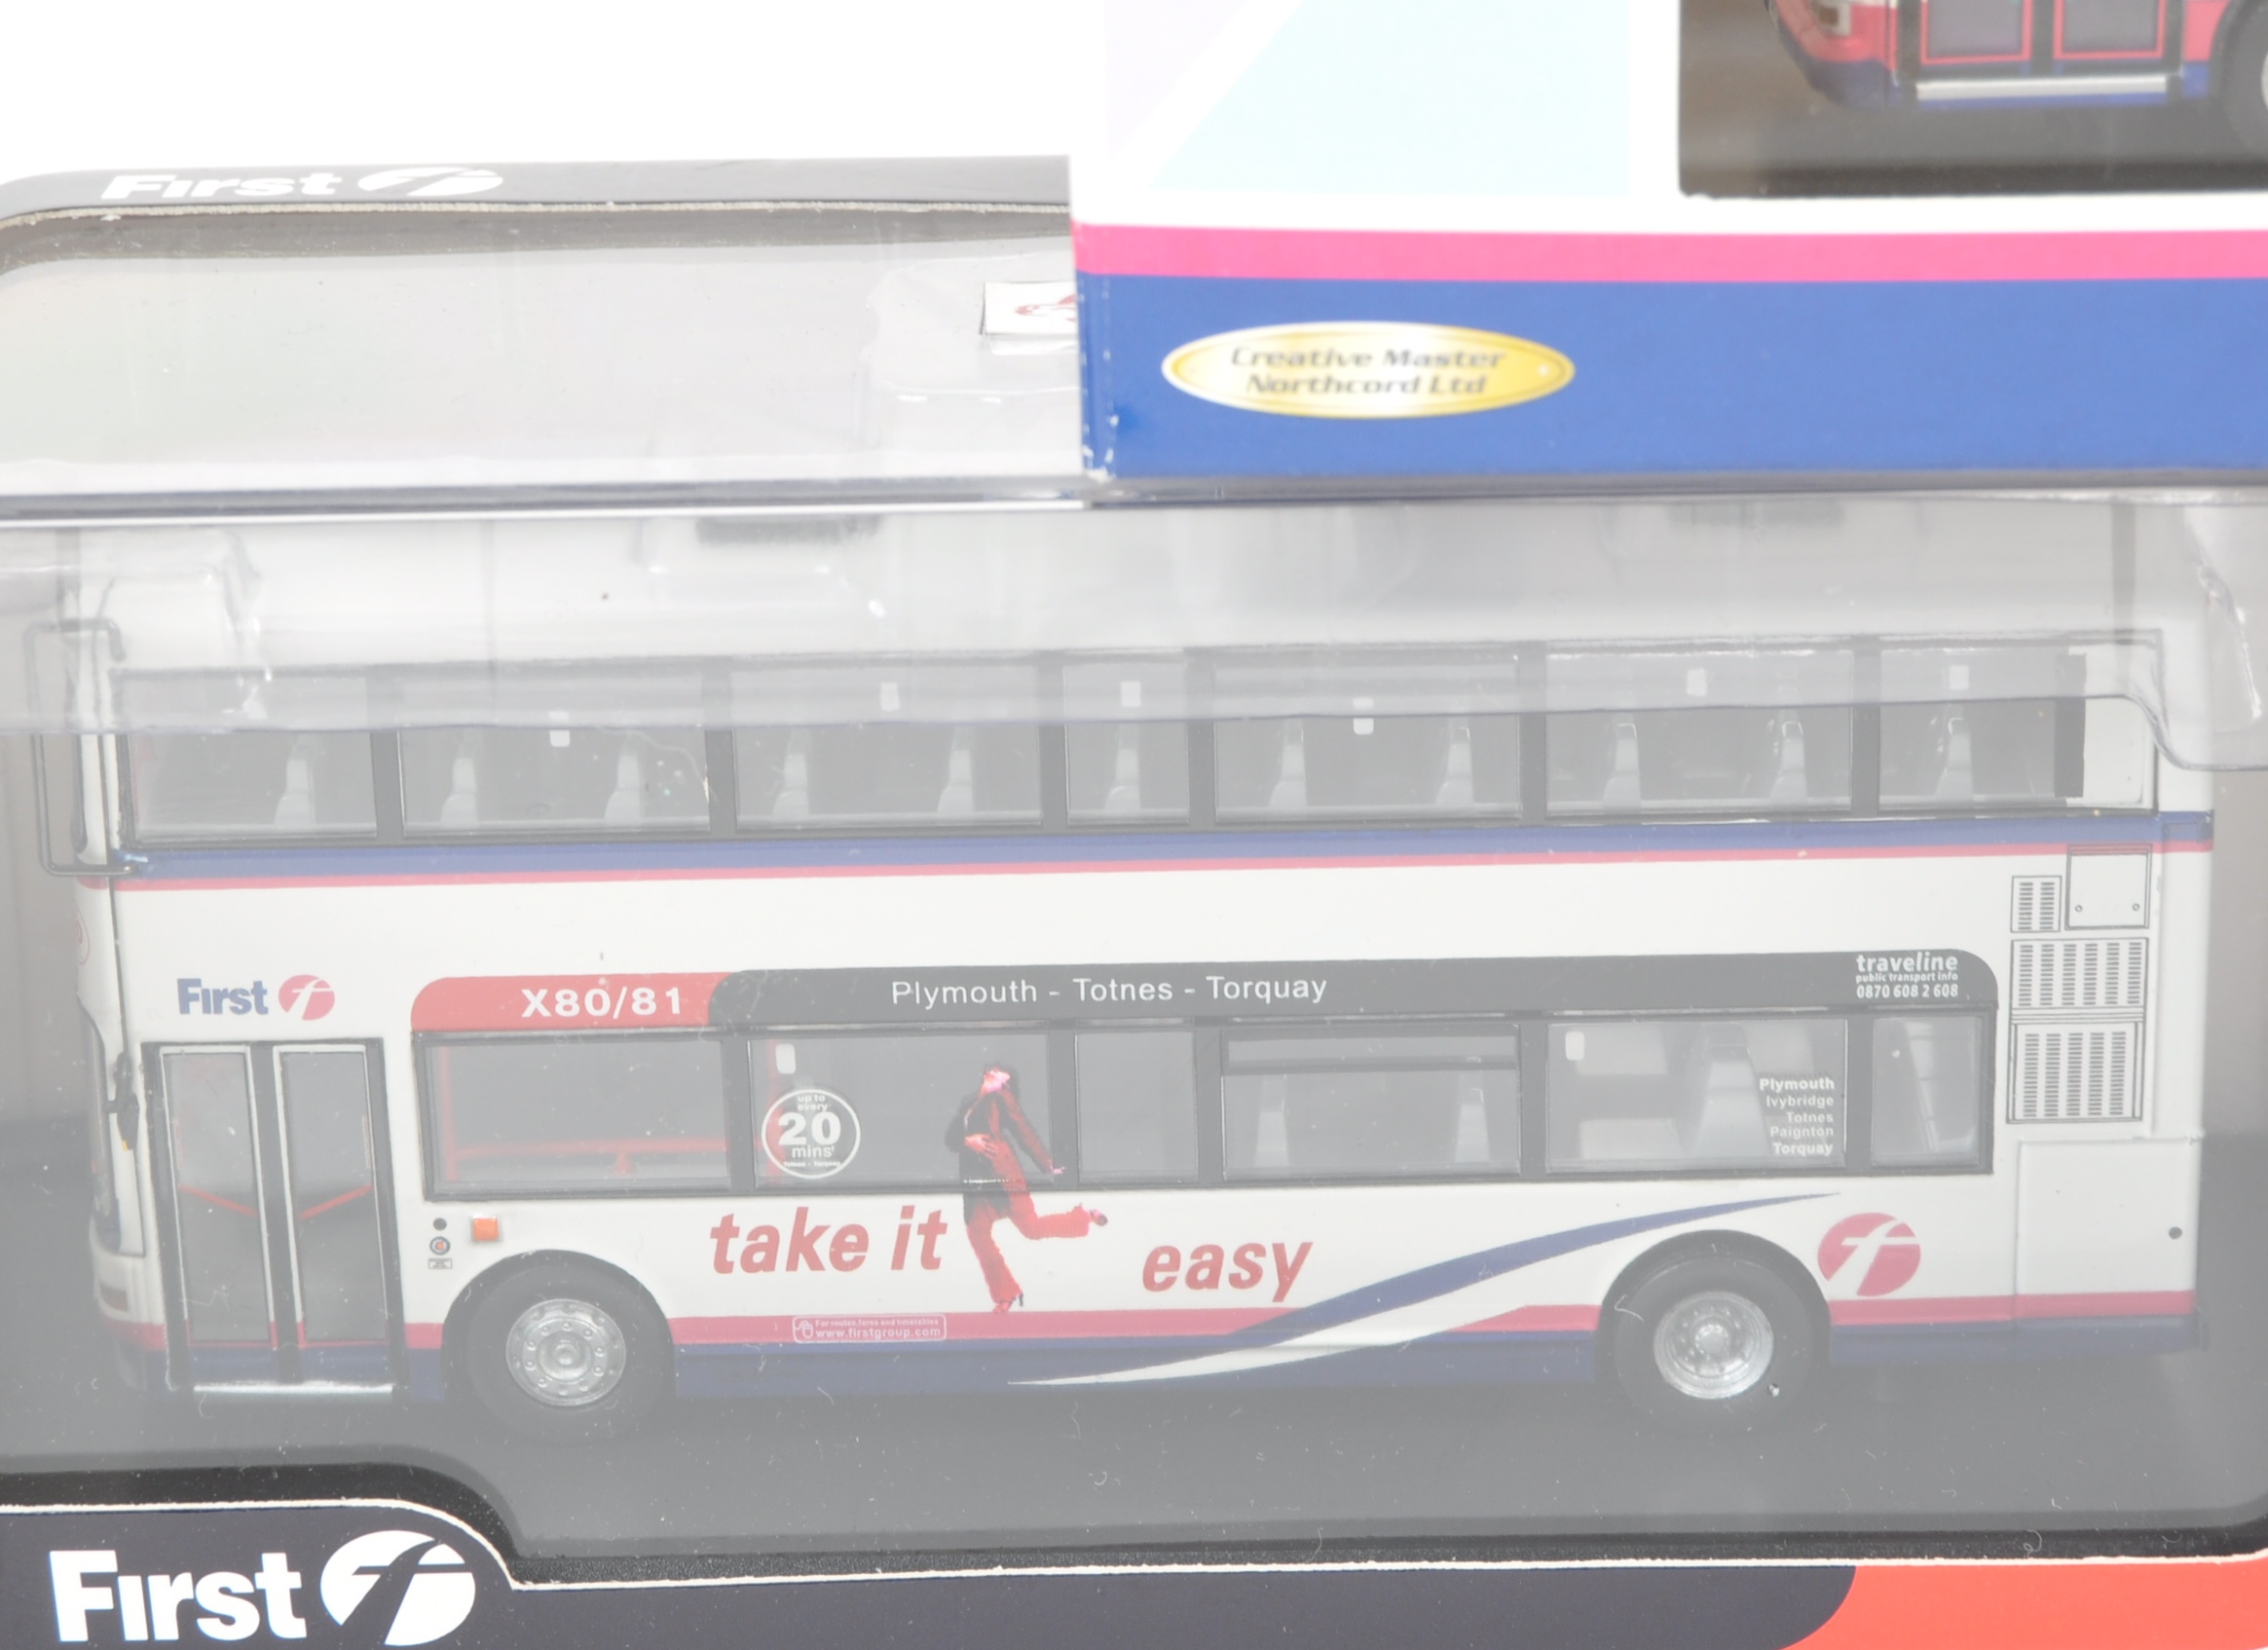 COLLECTION OF CMNL UKBUS DIECAST MODEL BUSES - Image 4 of 5